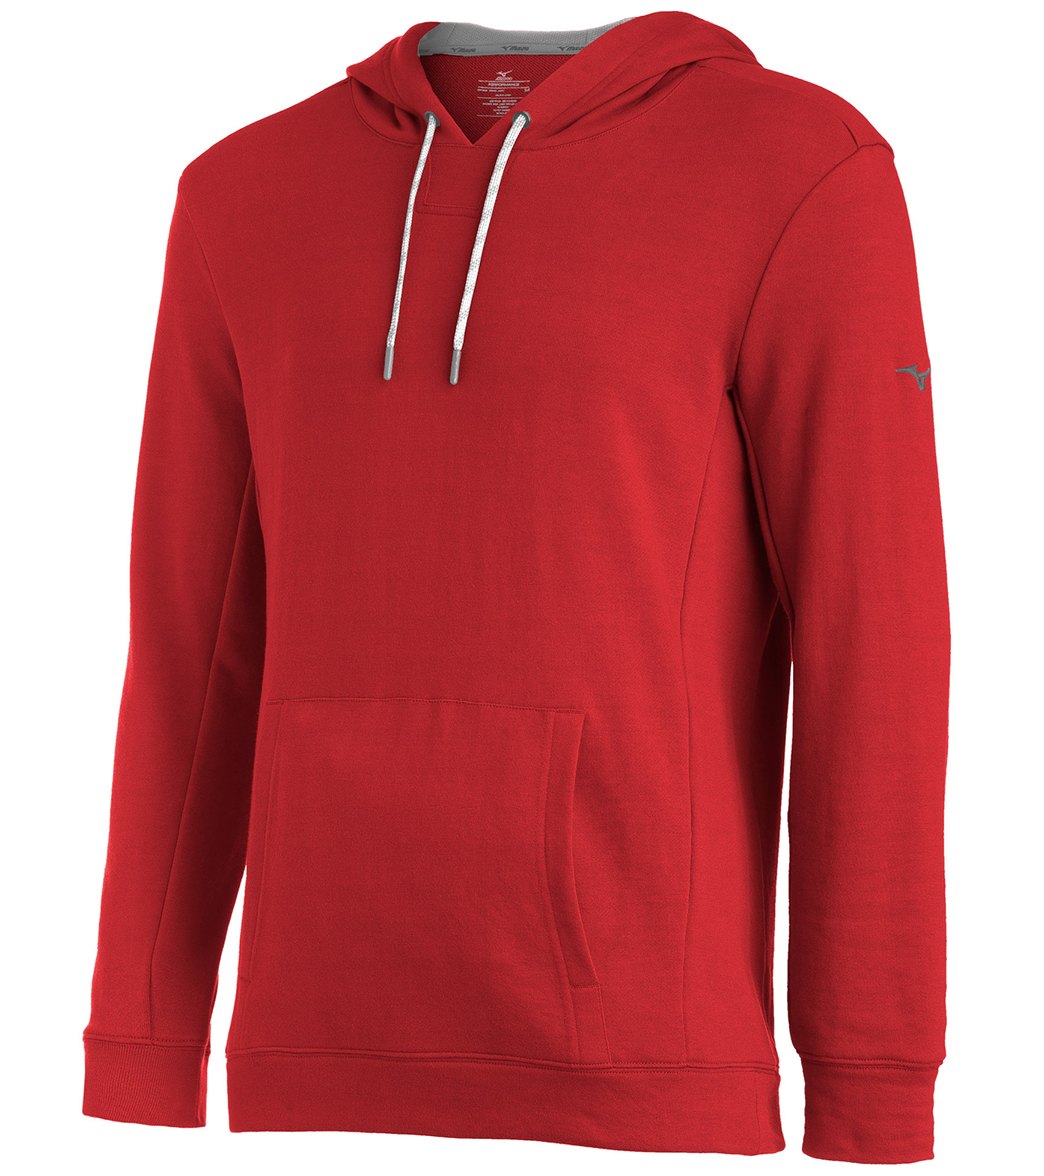 Mizuno Men's Comp Warm Up Hoodie - Red Large Cotton/Polyester - Swimoutlet.com